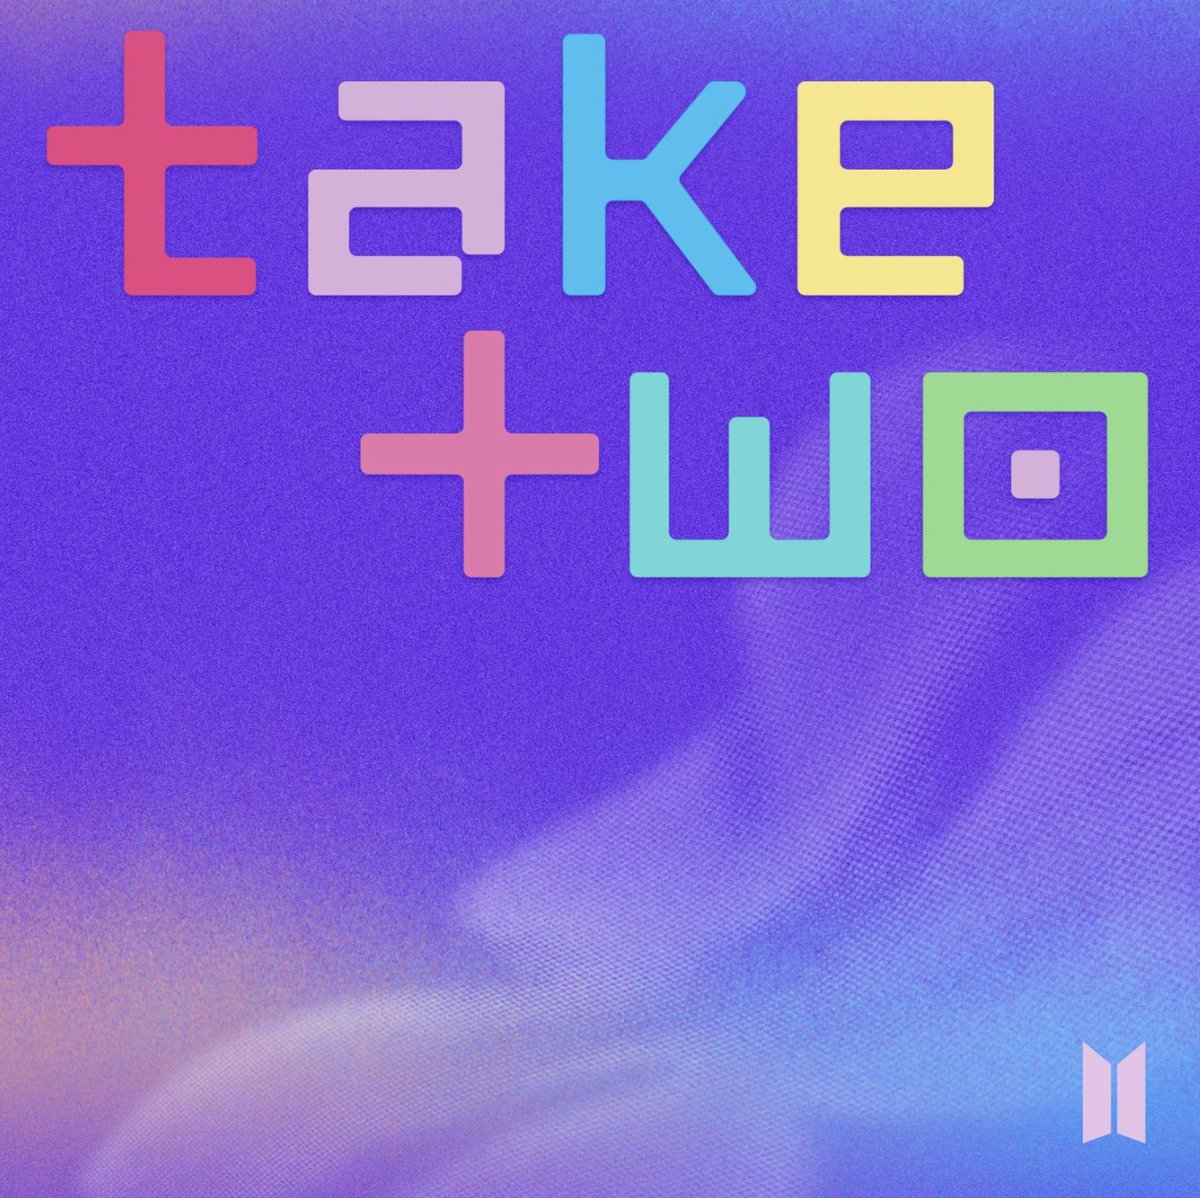 'TAKE TWO' BY BTS COMING THIS FRIDAY 1 PM KST!! GET READY